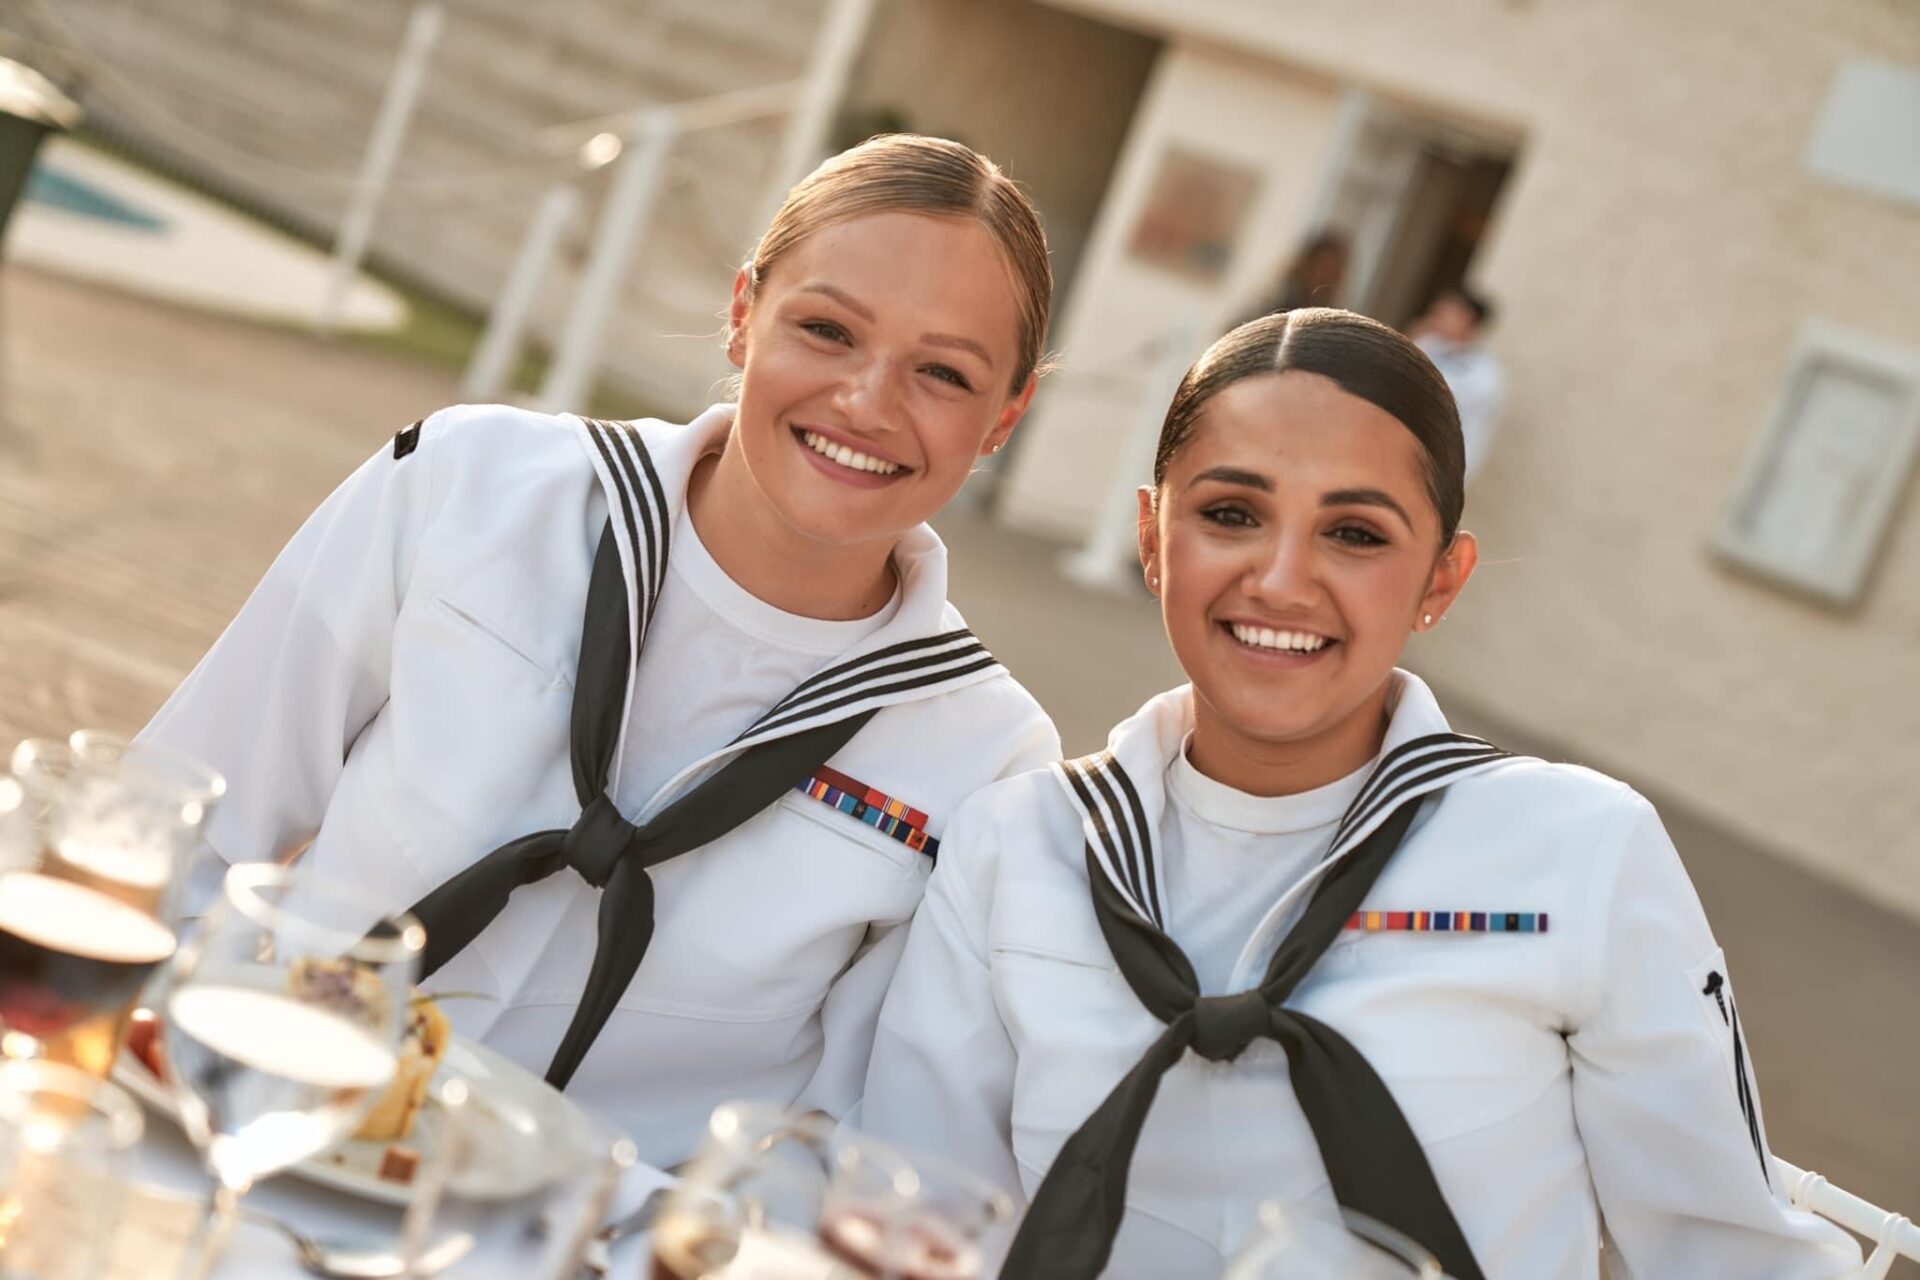 Gary's daughter smiles in uniform with a fellow sailor